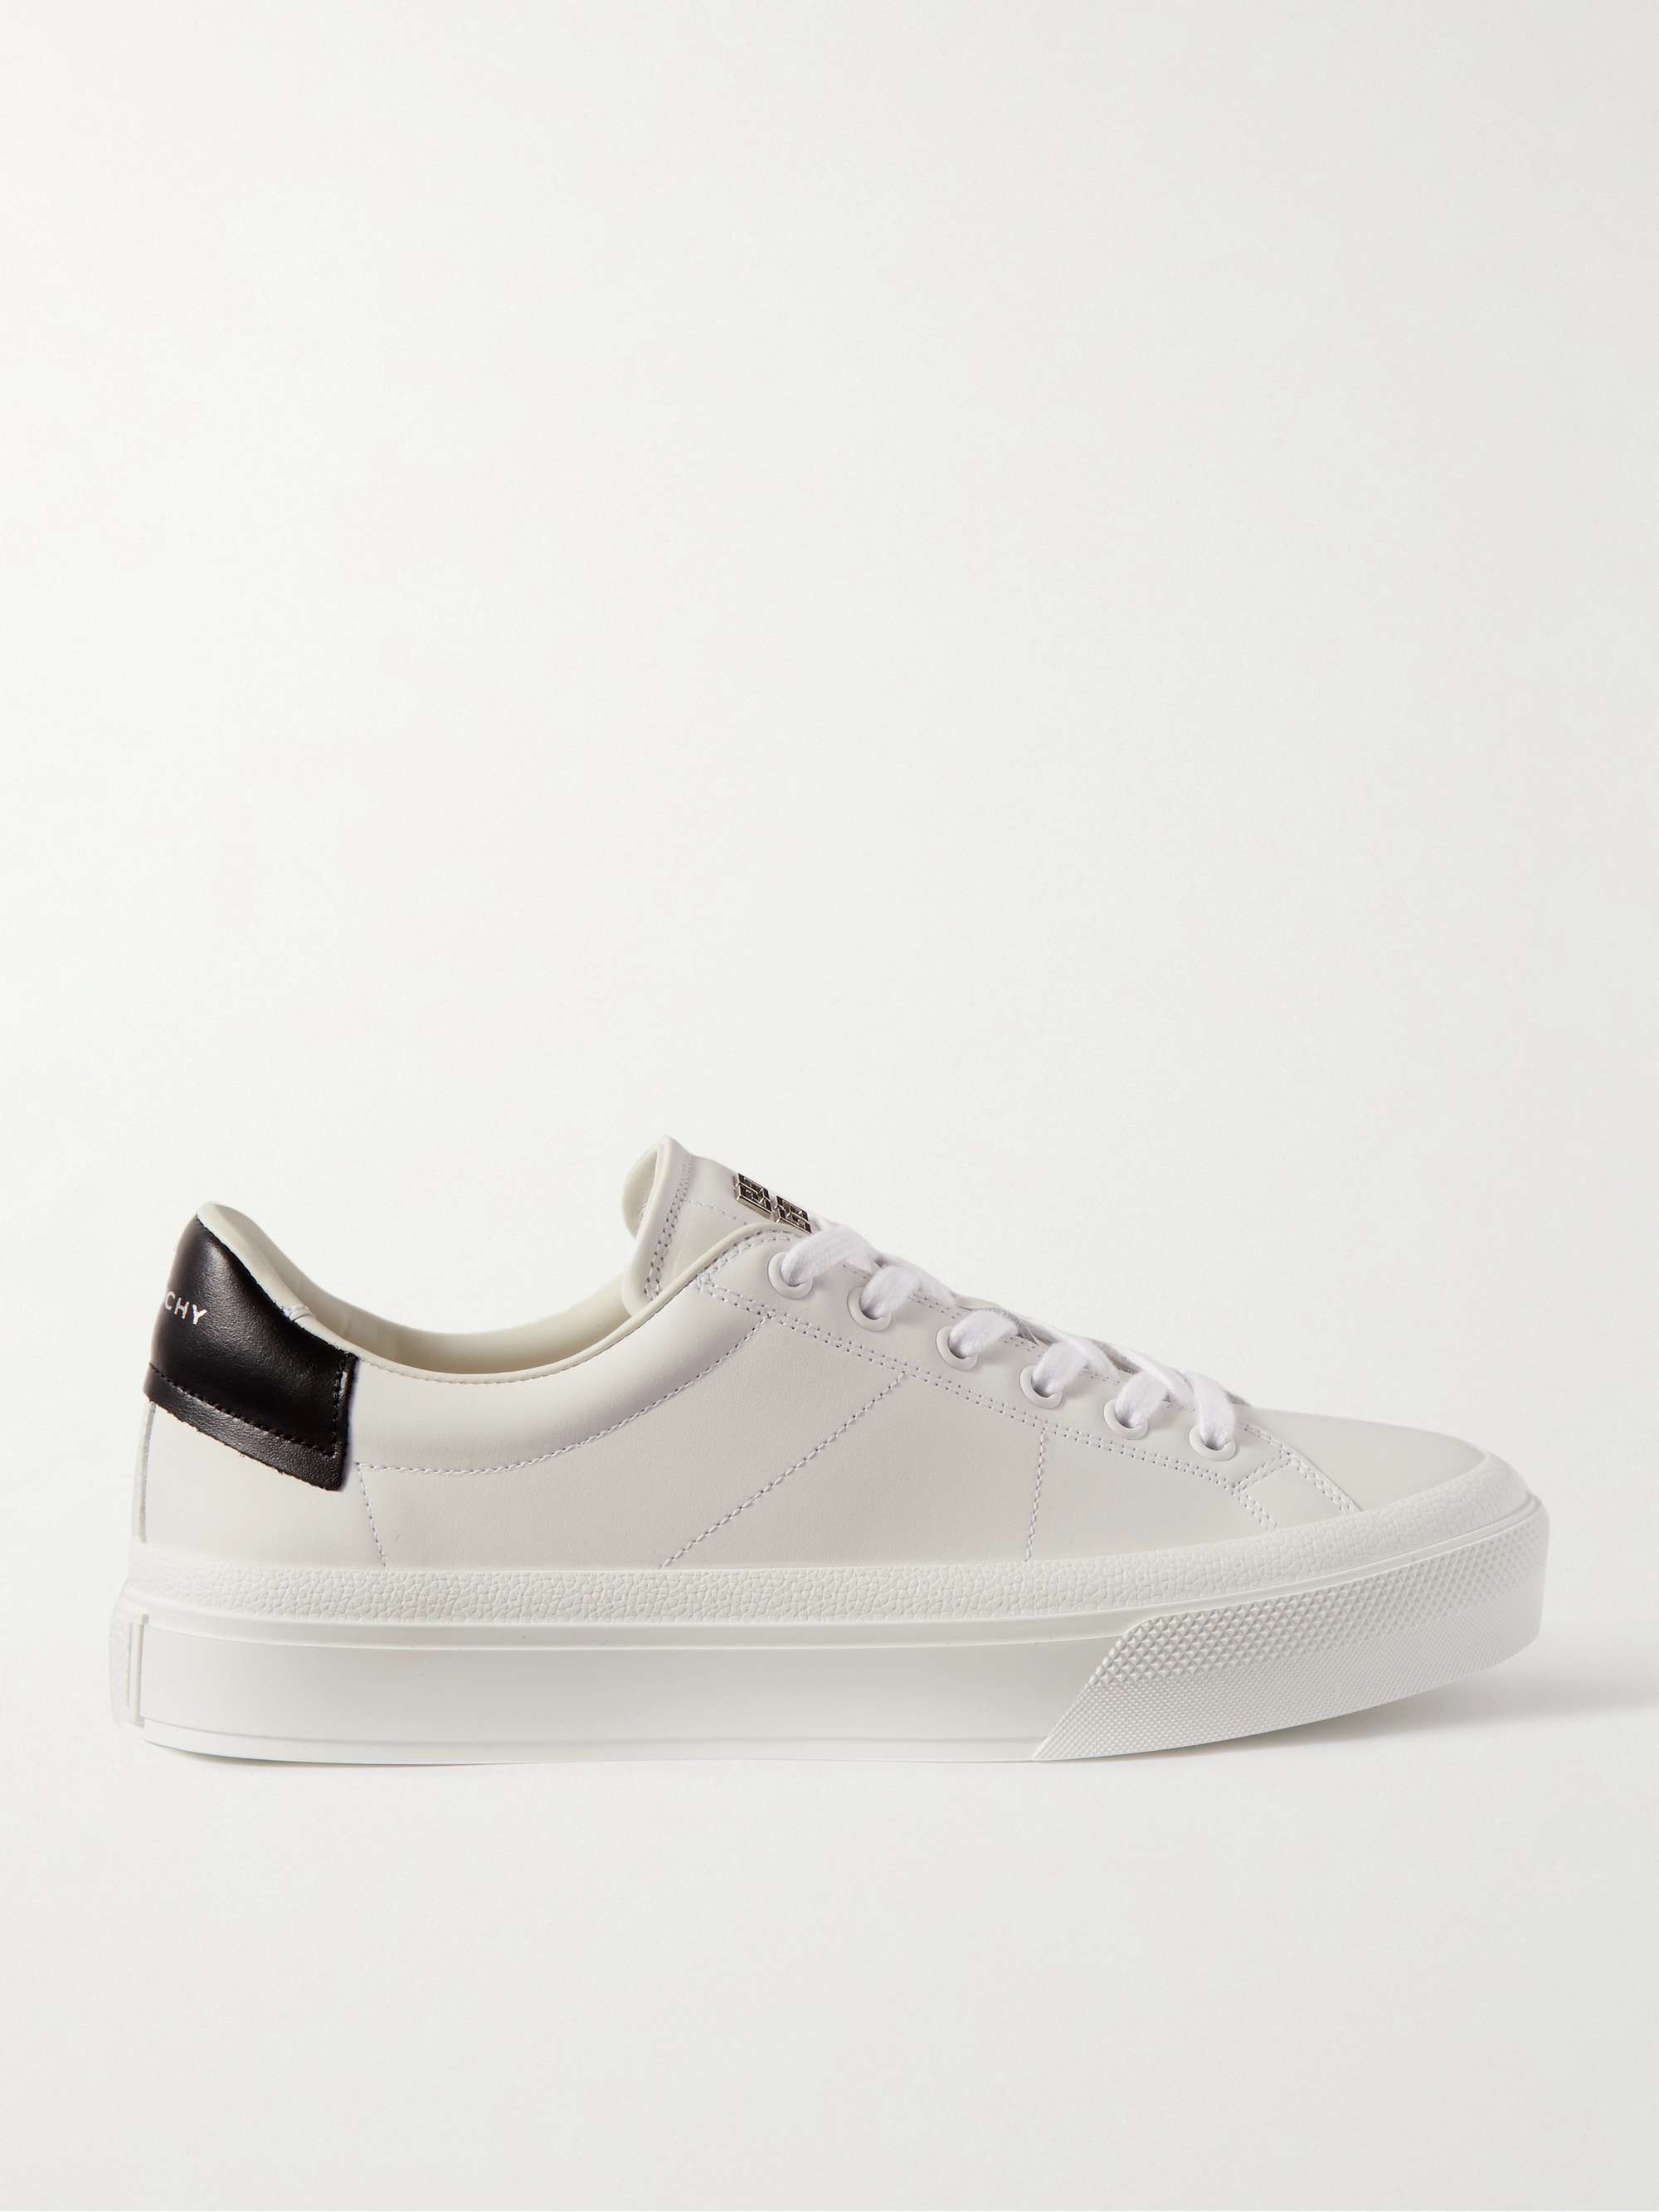 GIVENCHY City Sport Leather Sneakers